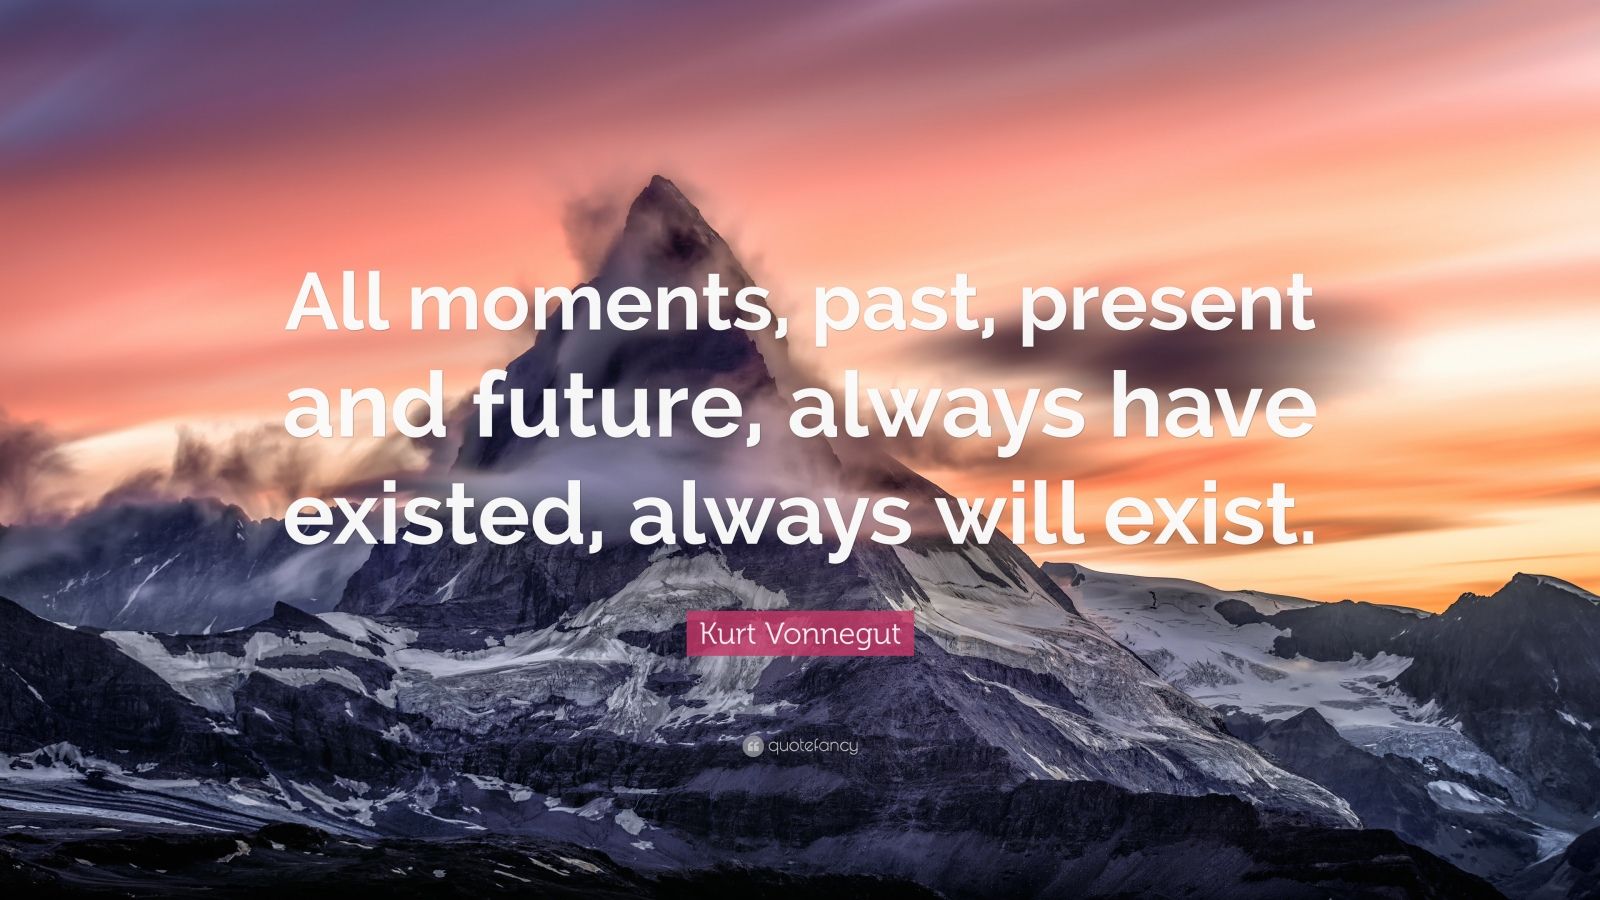 Kurt Vonnegut Quote: “All moments, past, present and future, always ...